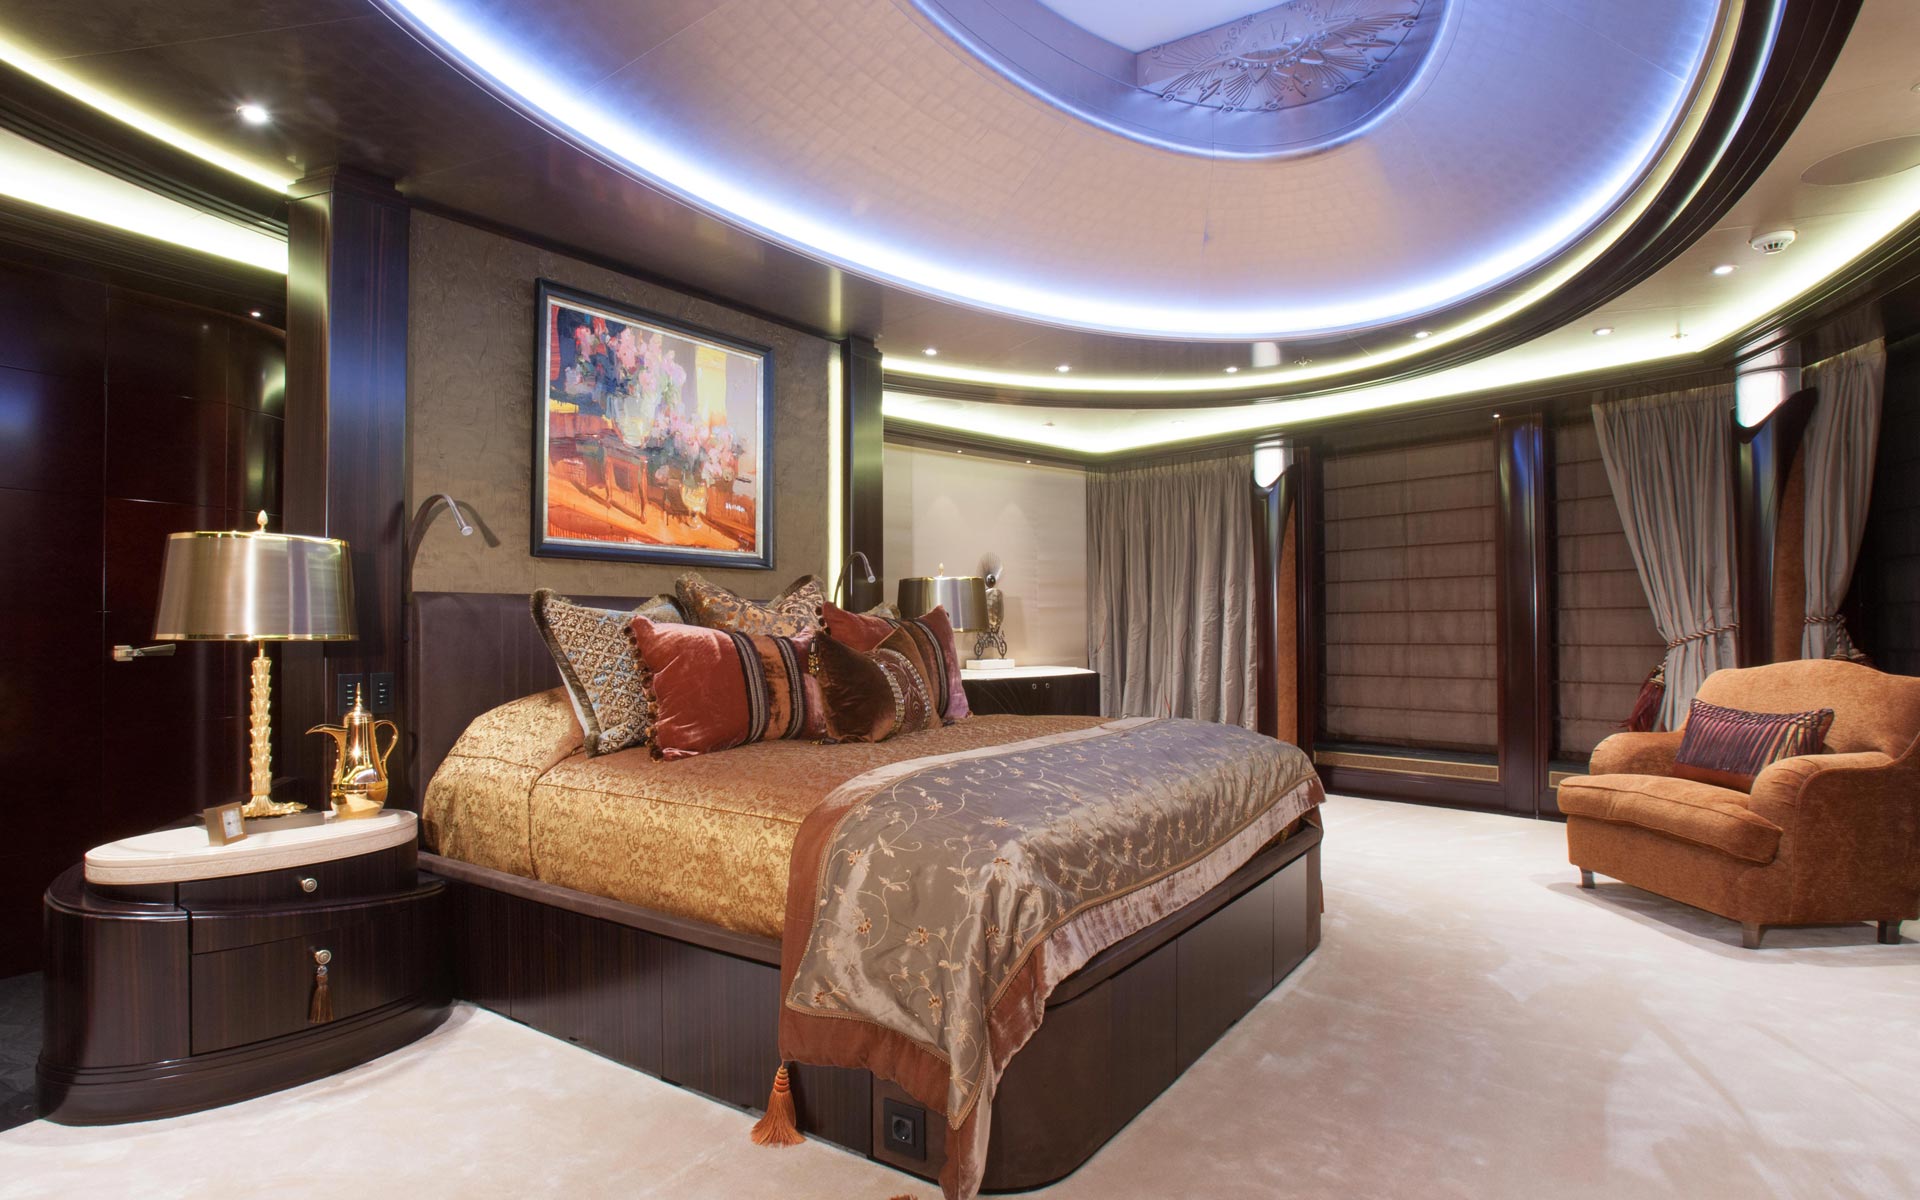 Guest Accommodation With Opulent Furnishings